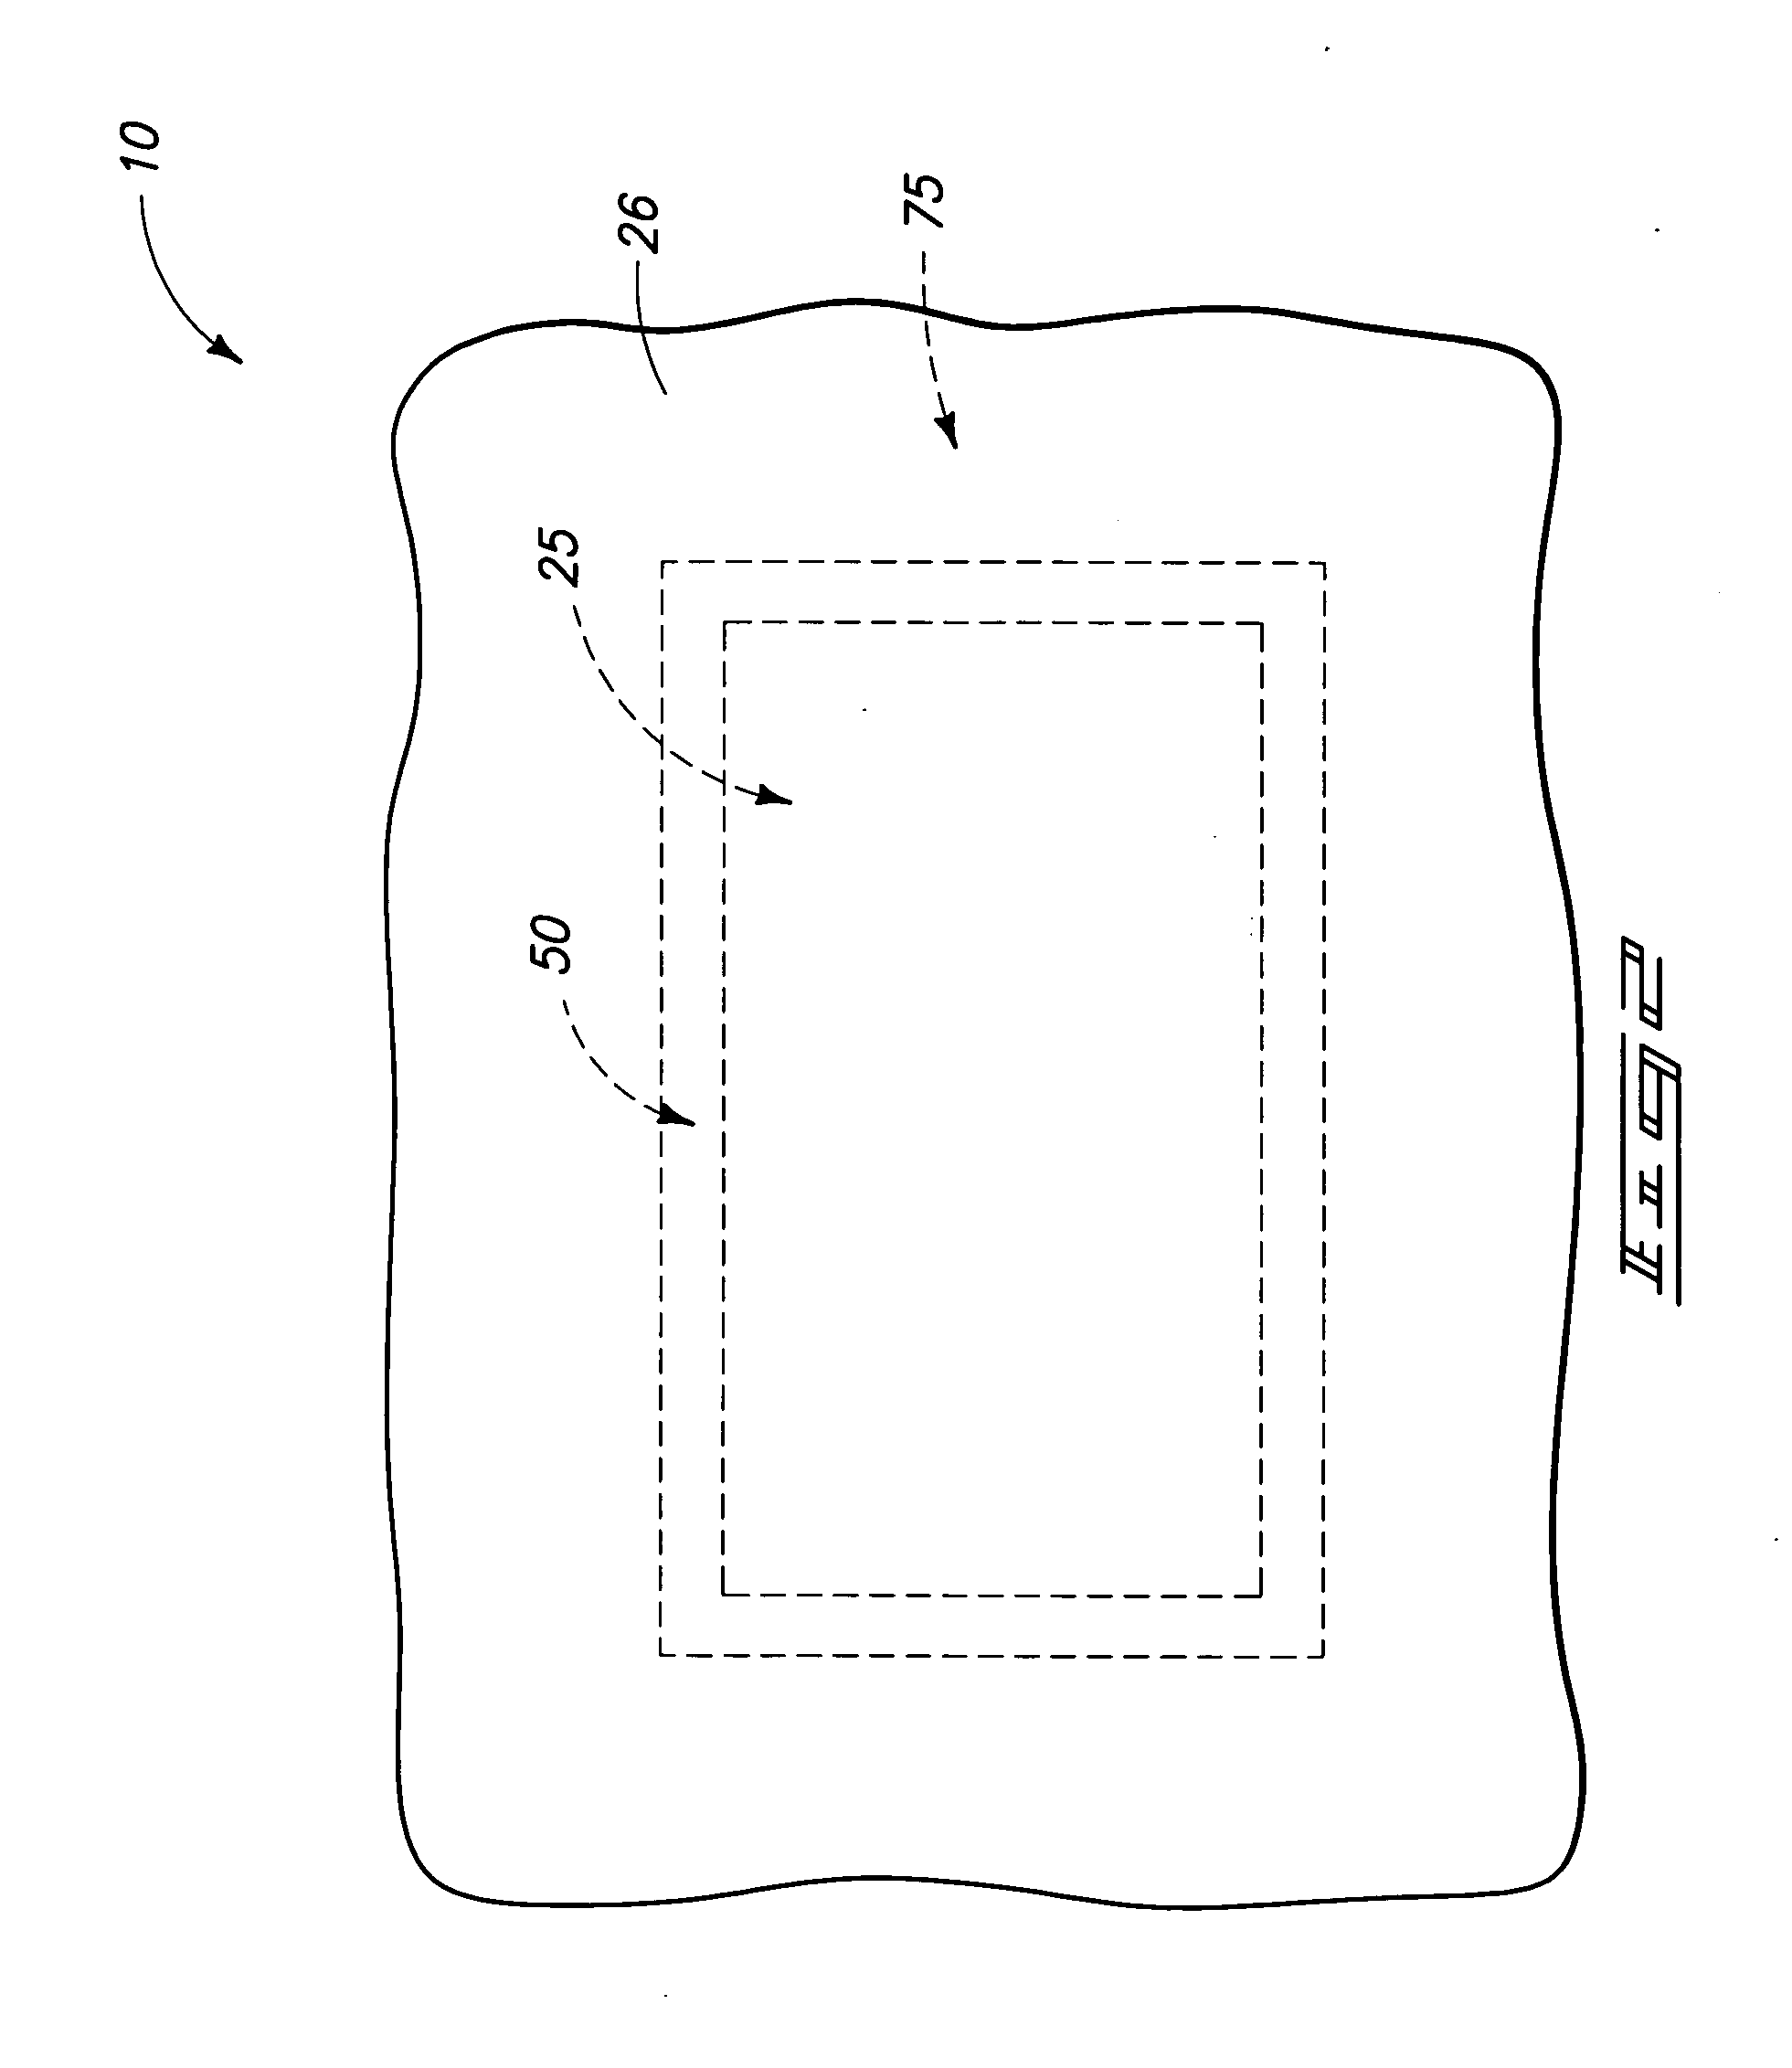 Methods of etching polysilicon and methods of forming pluralities of capacitors